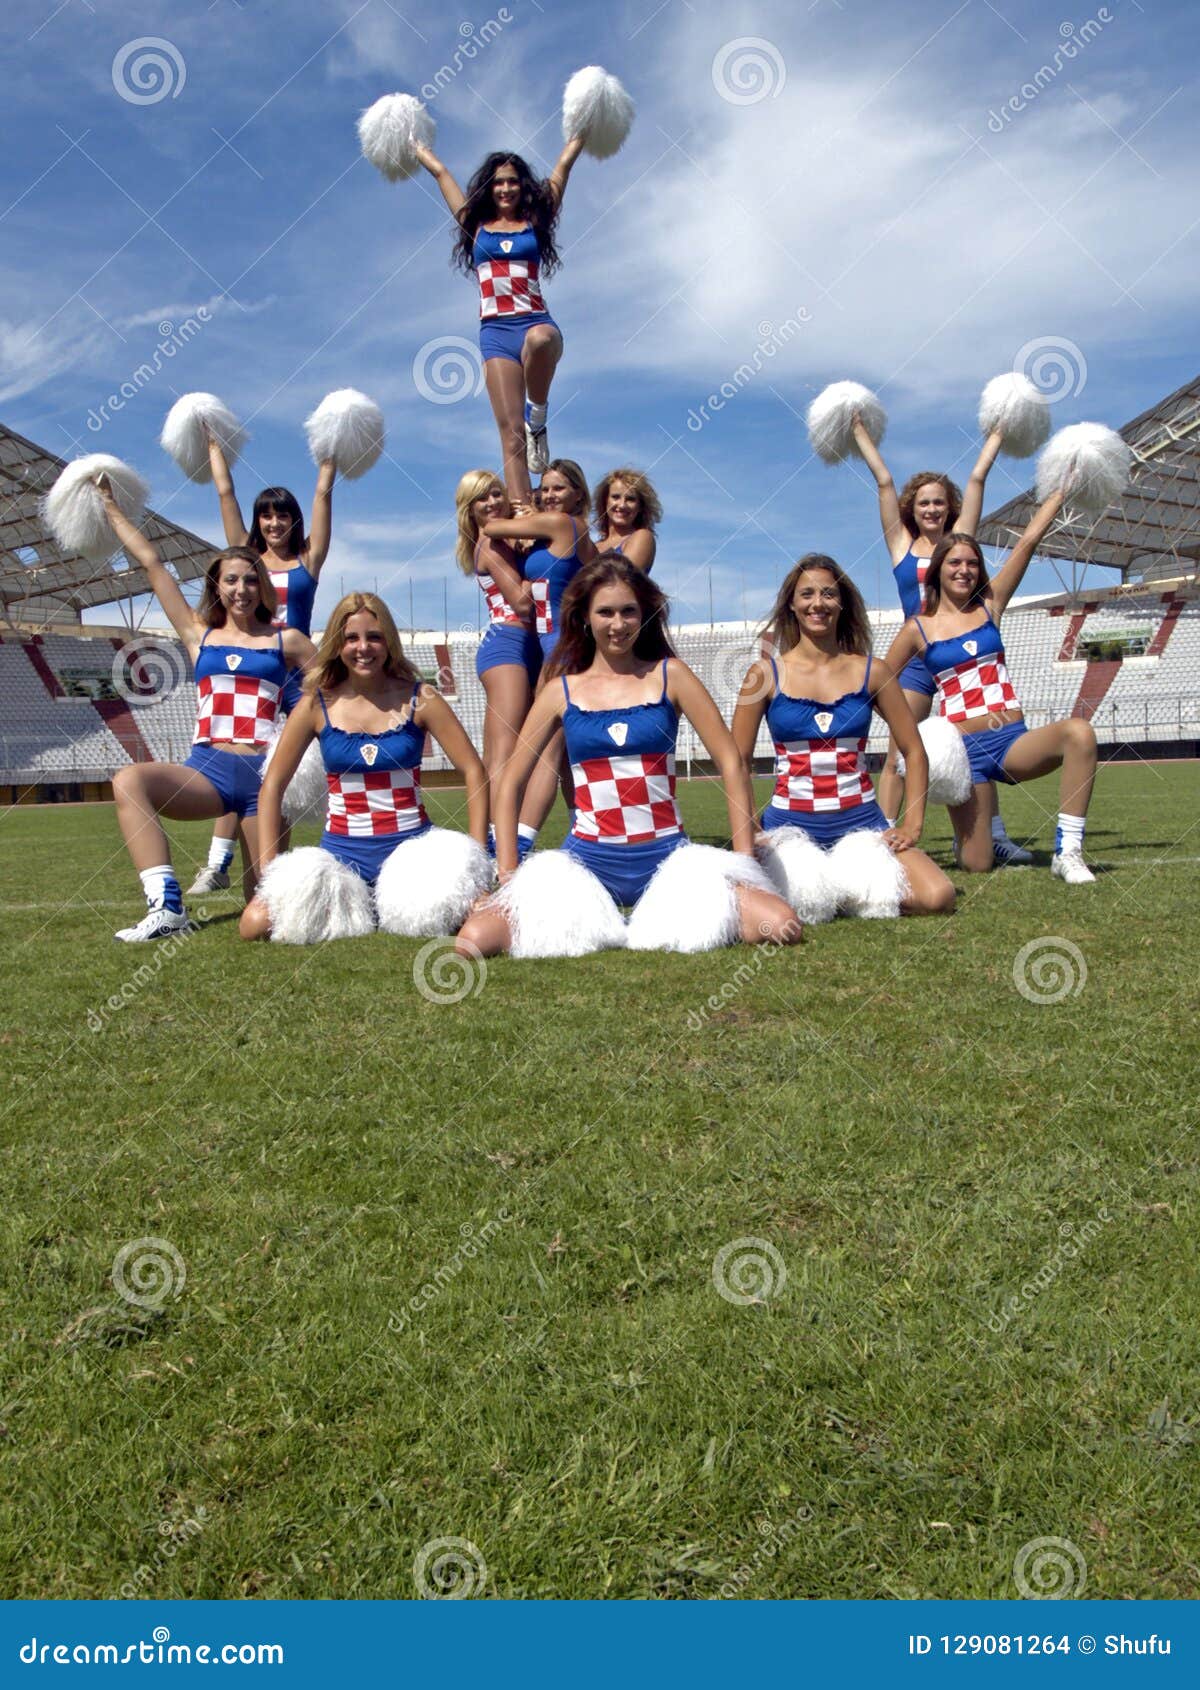 Cheerleaders Formation on the Grass Editorial Stock Image - Image